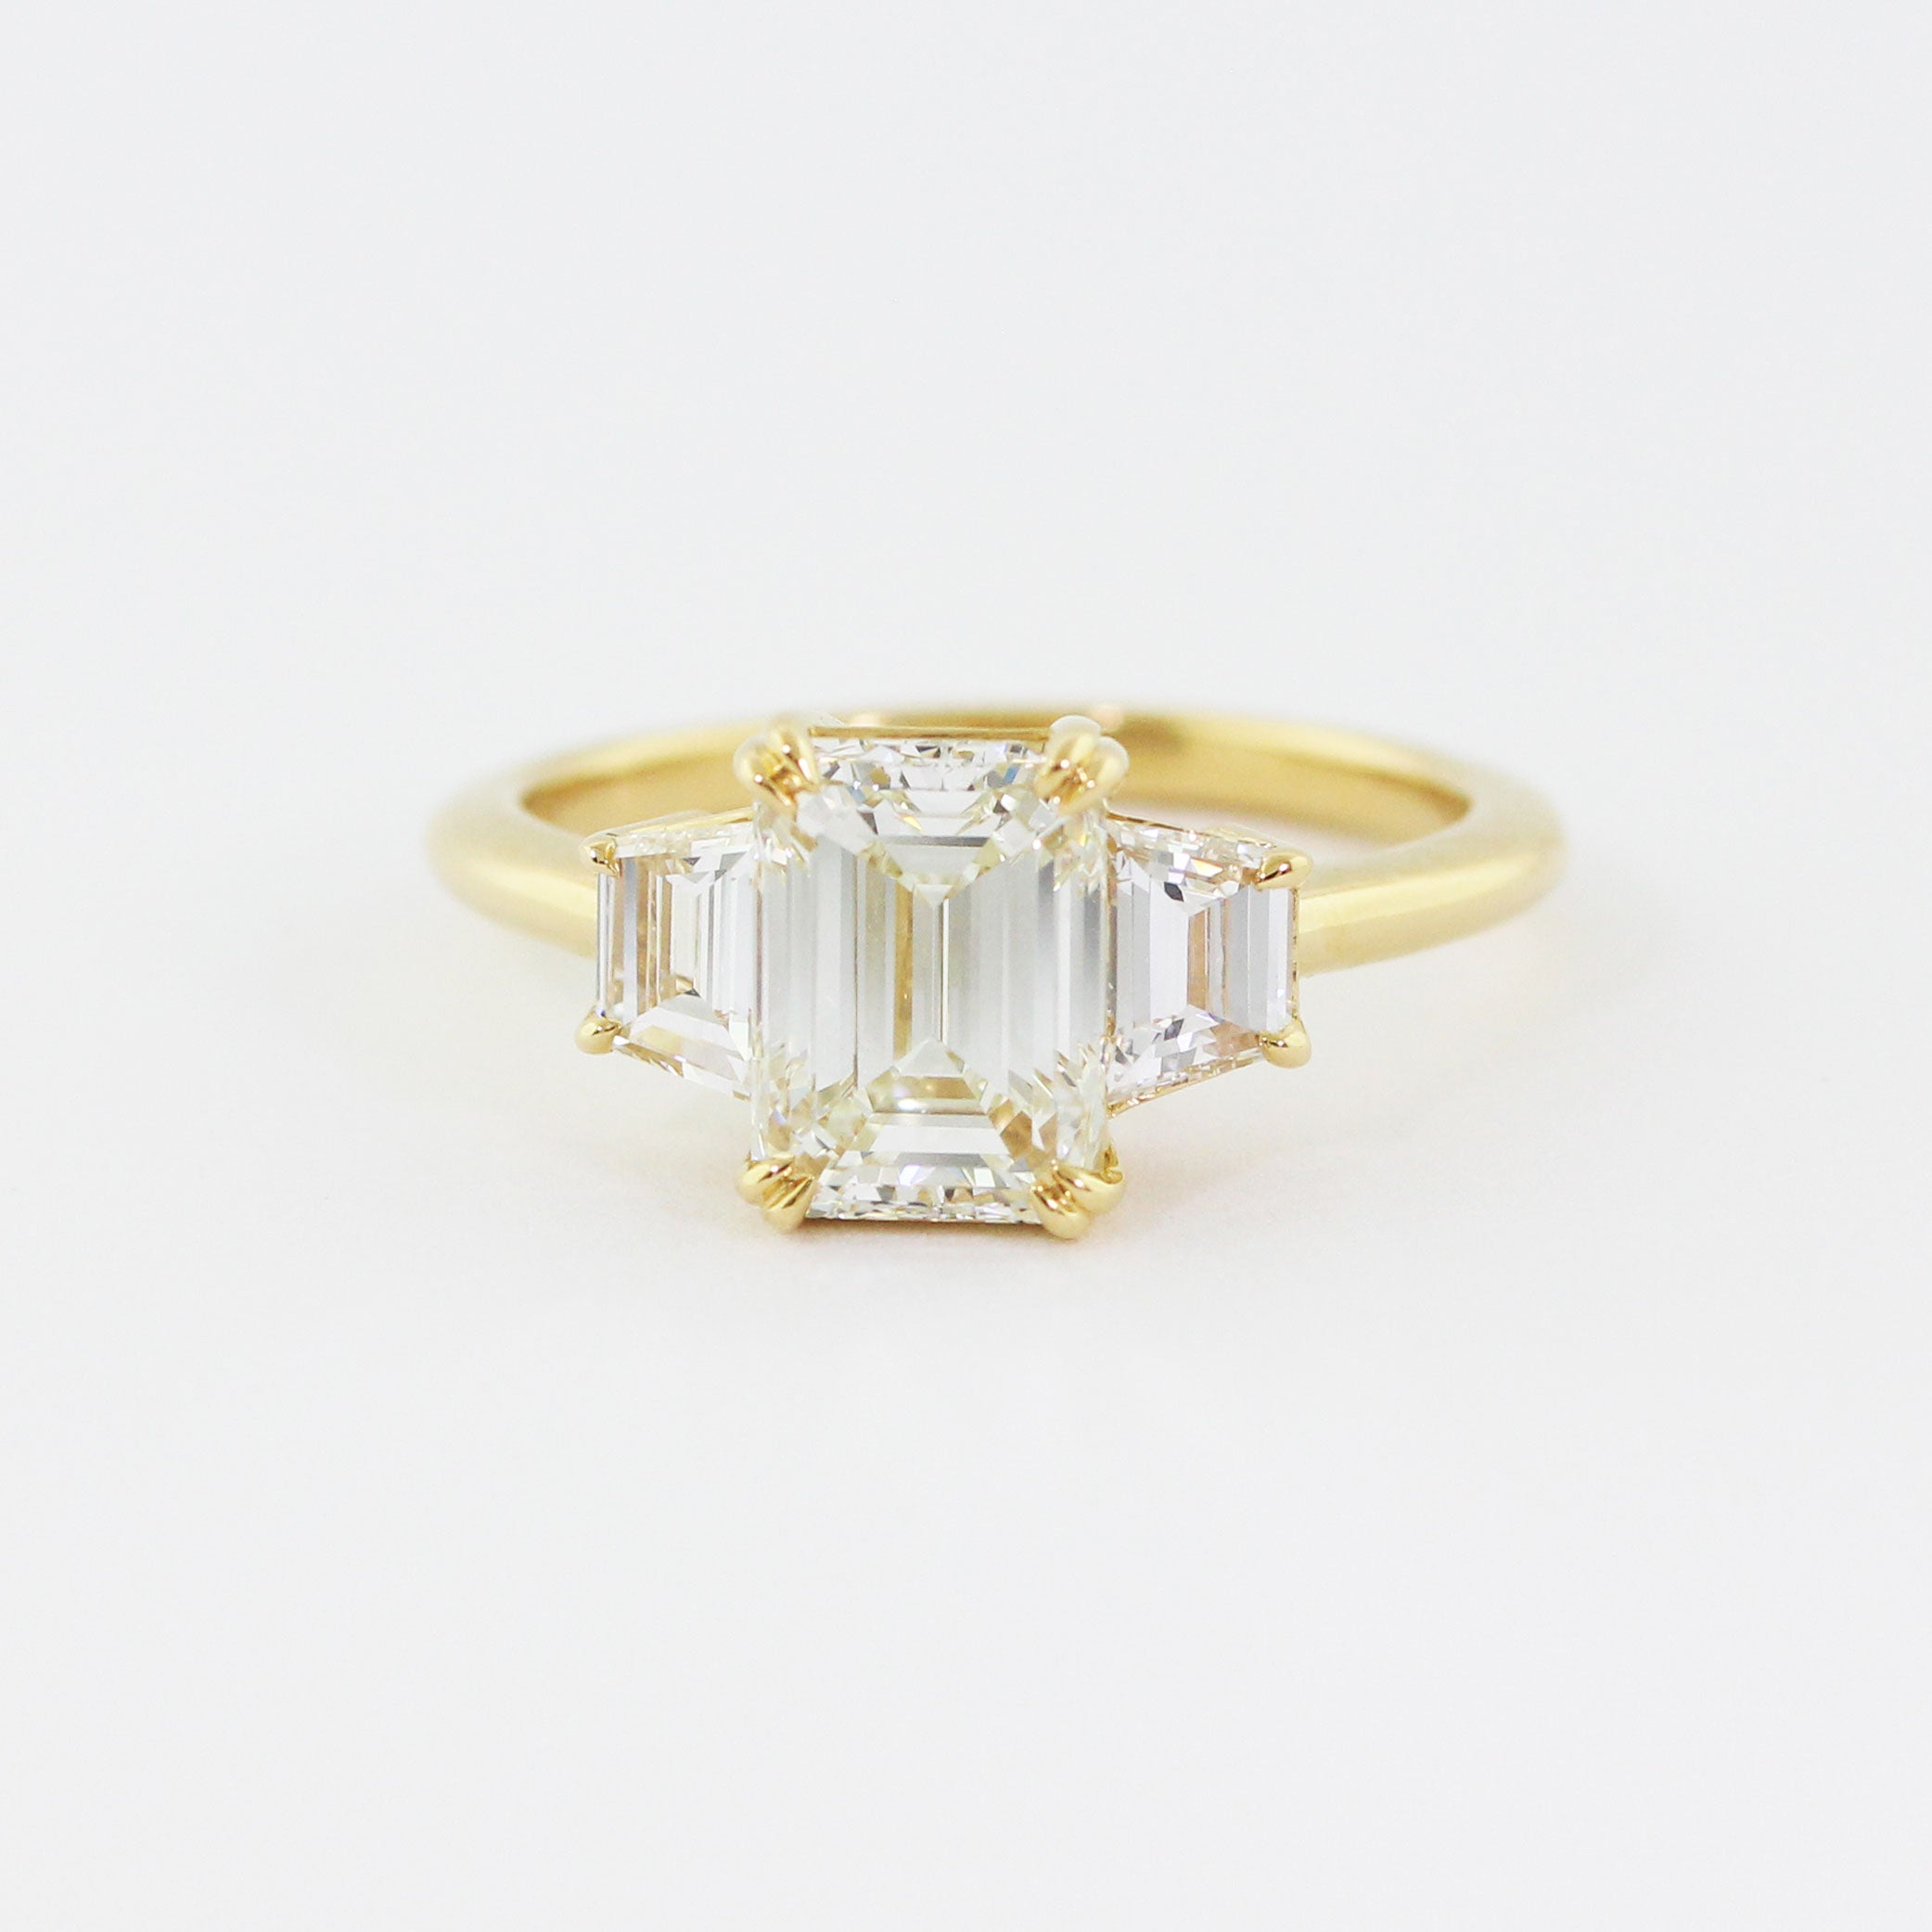 Custom 14k yellow gold three stone engagement ring with an heirloom emerald-cut center diamond flanked by two emerald-cut accent diamonds.